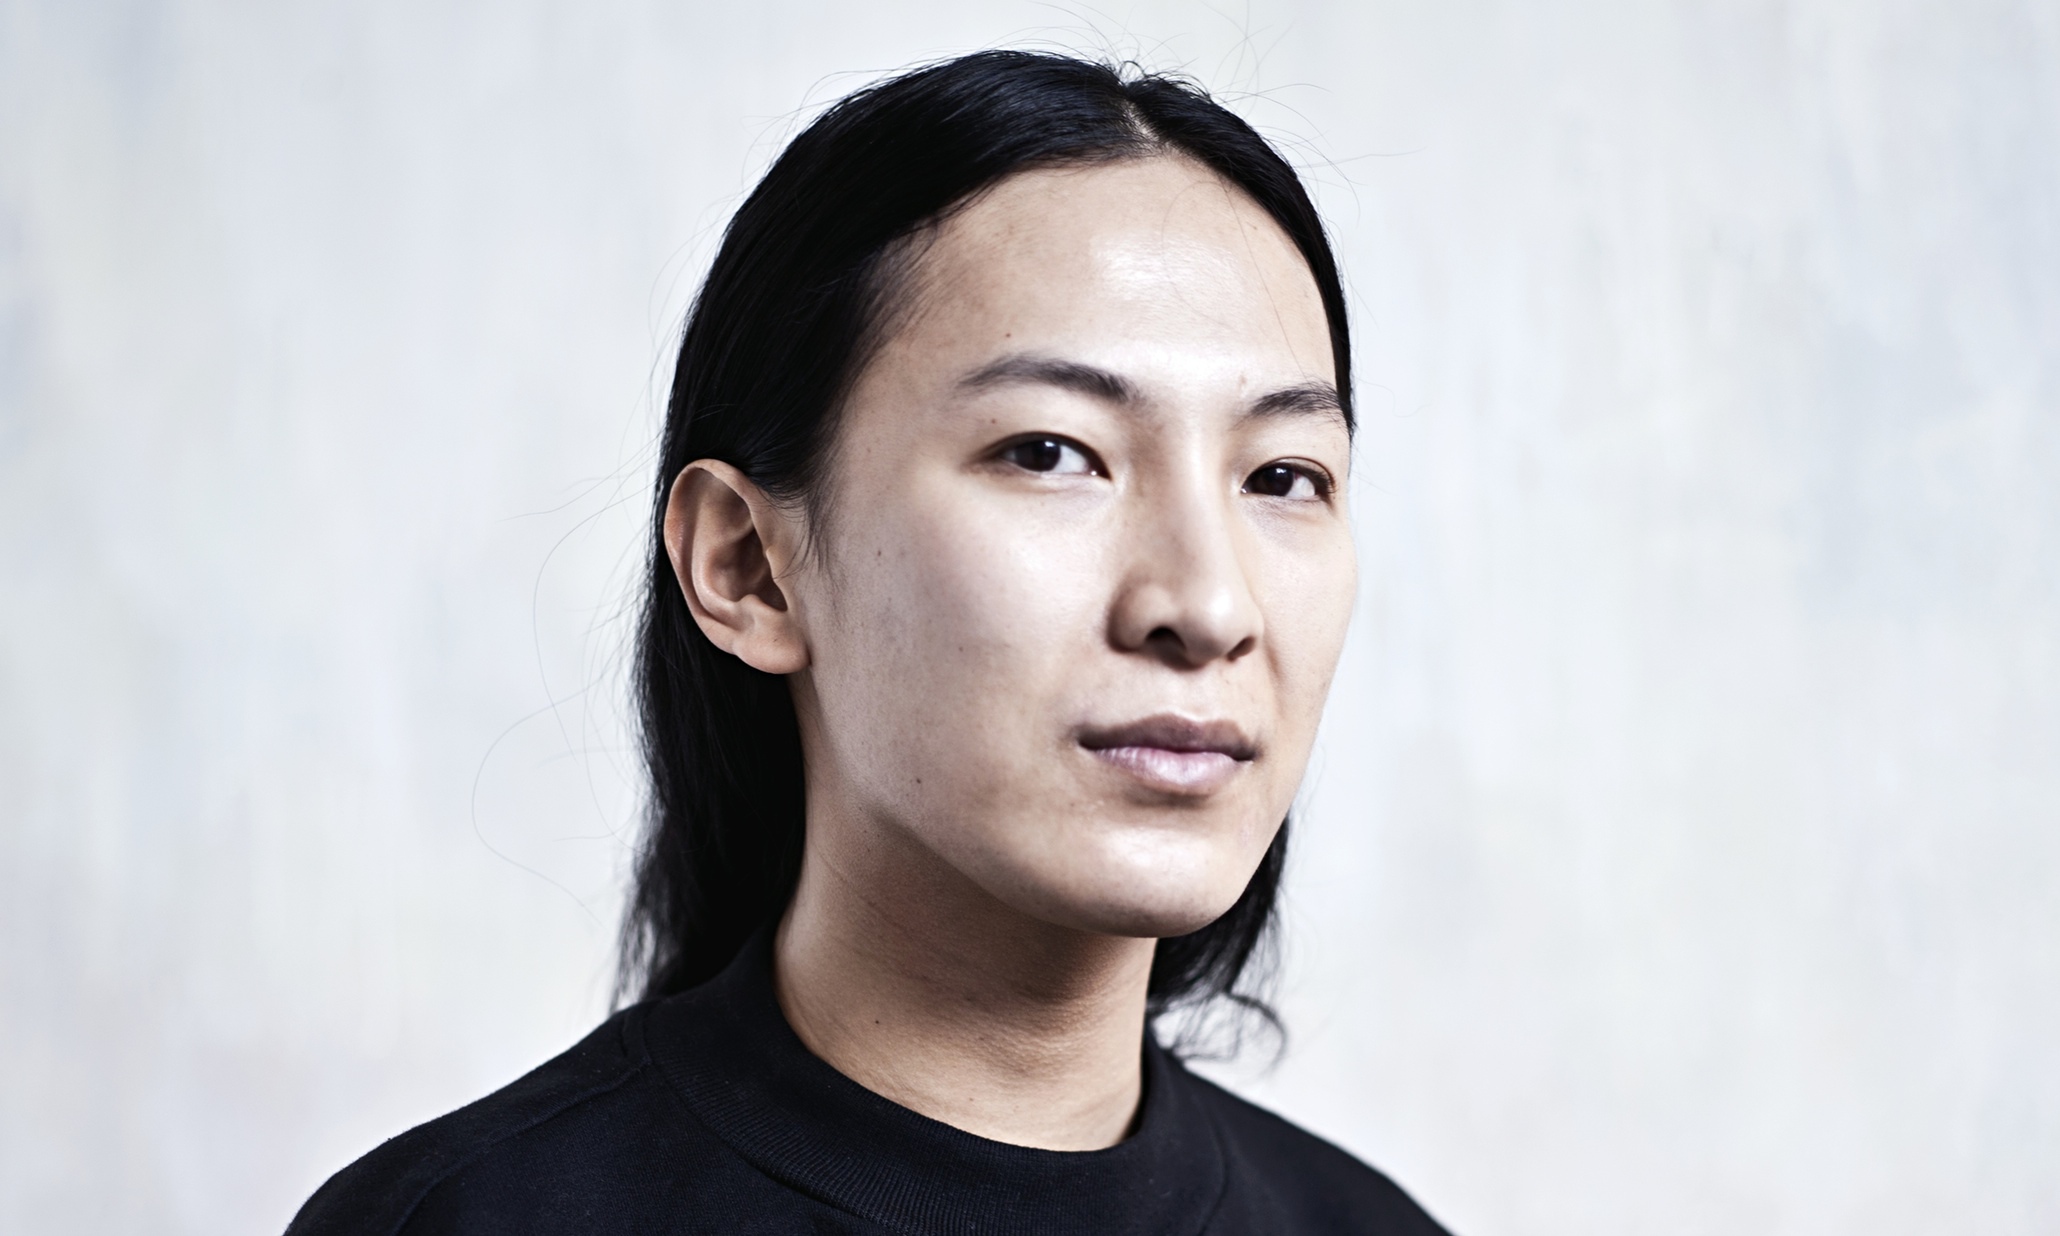 Apple Music launching curated playlists from Alexander Wang & other fashion designers